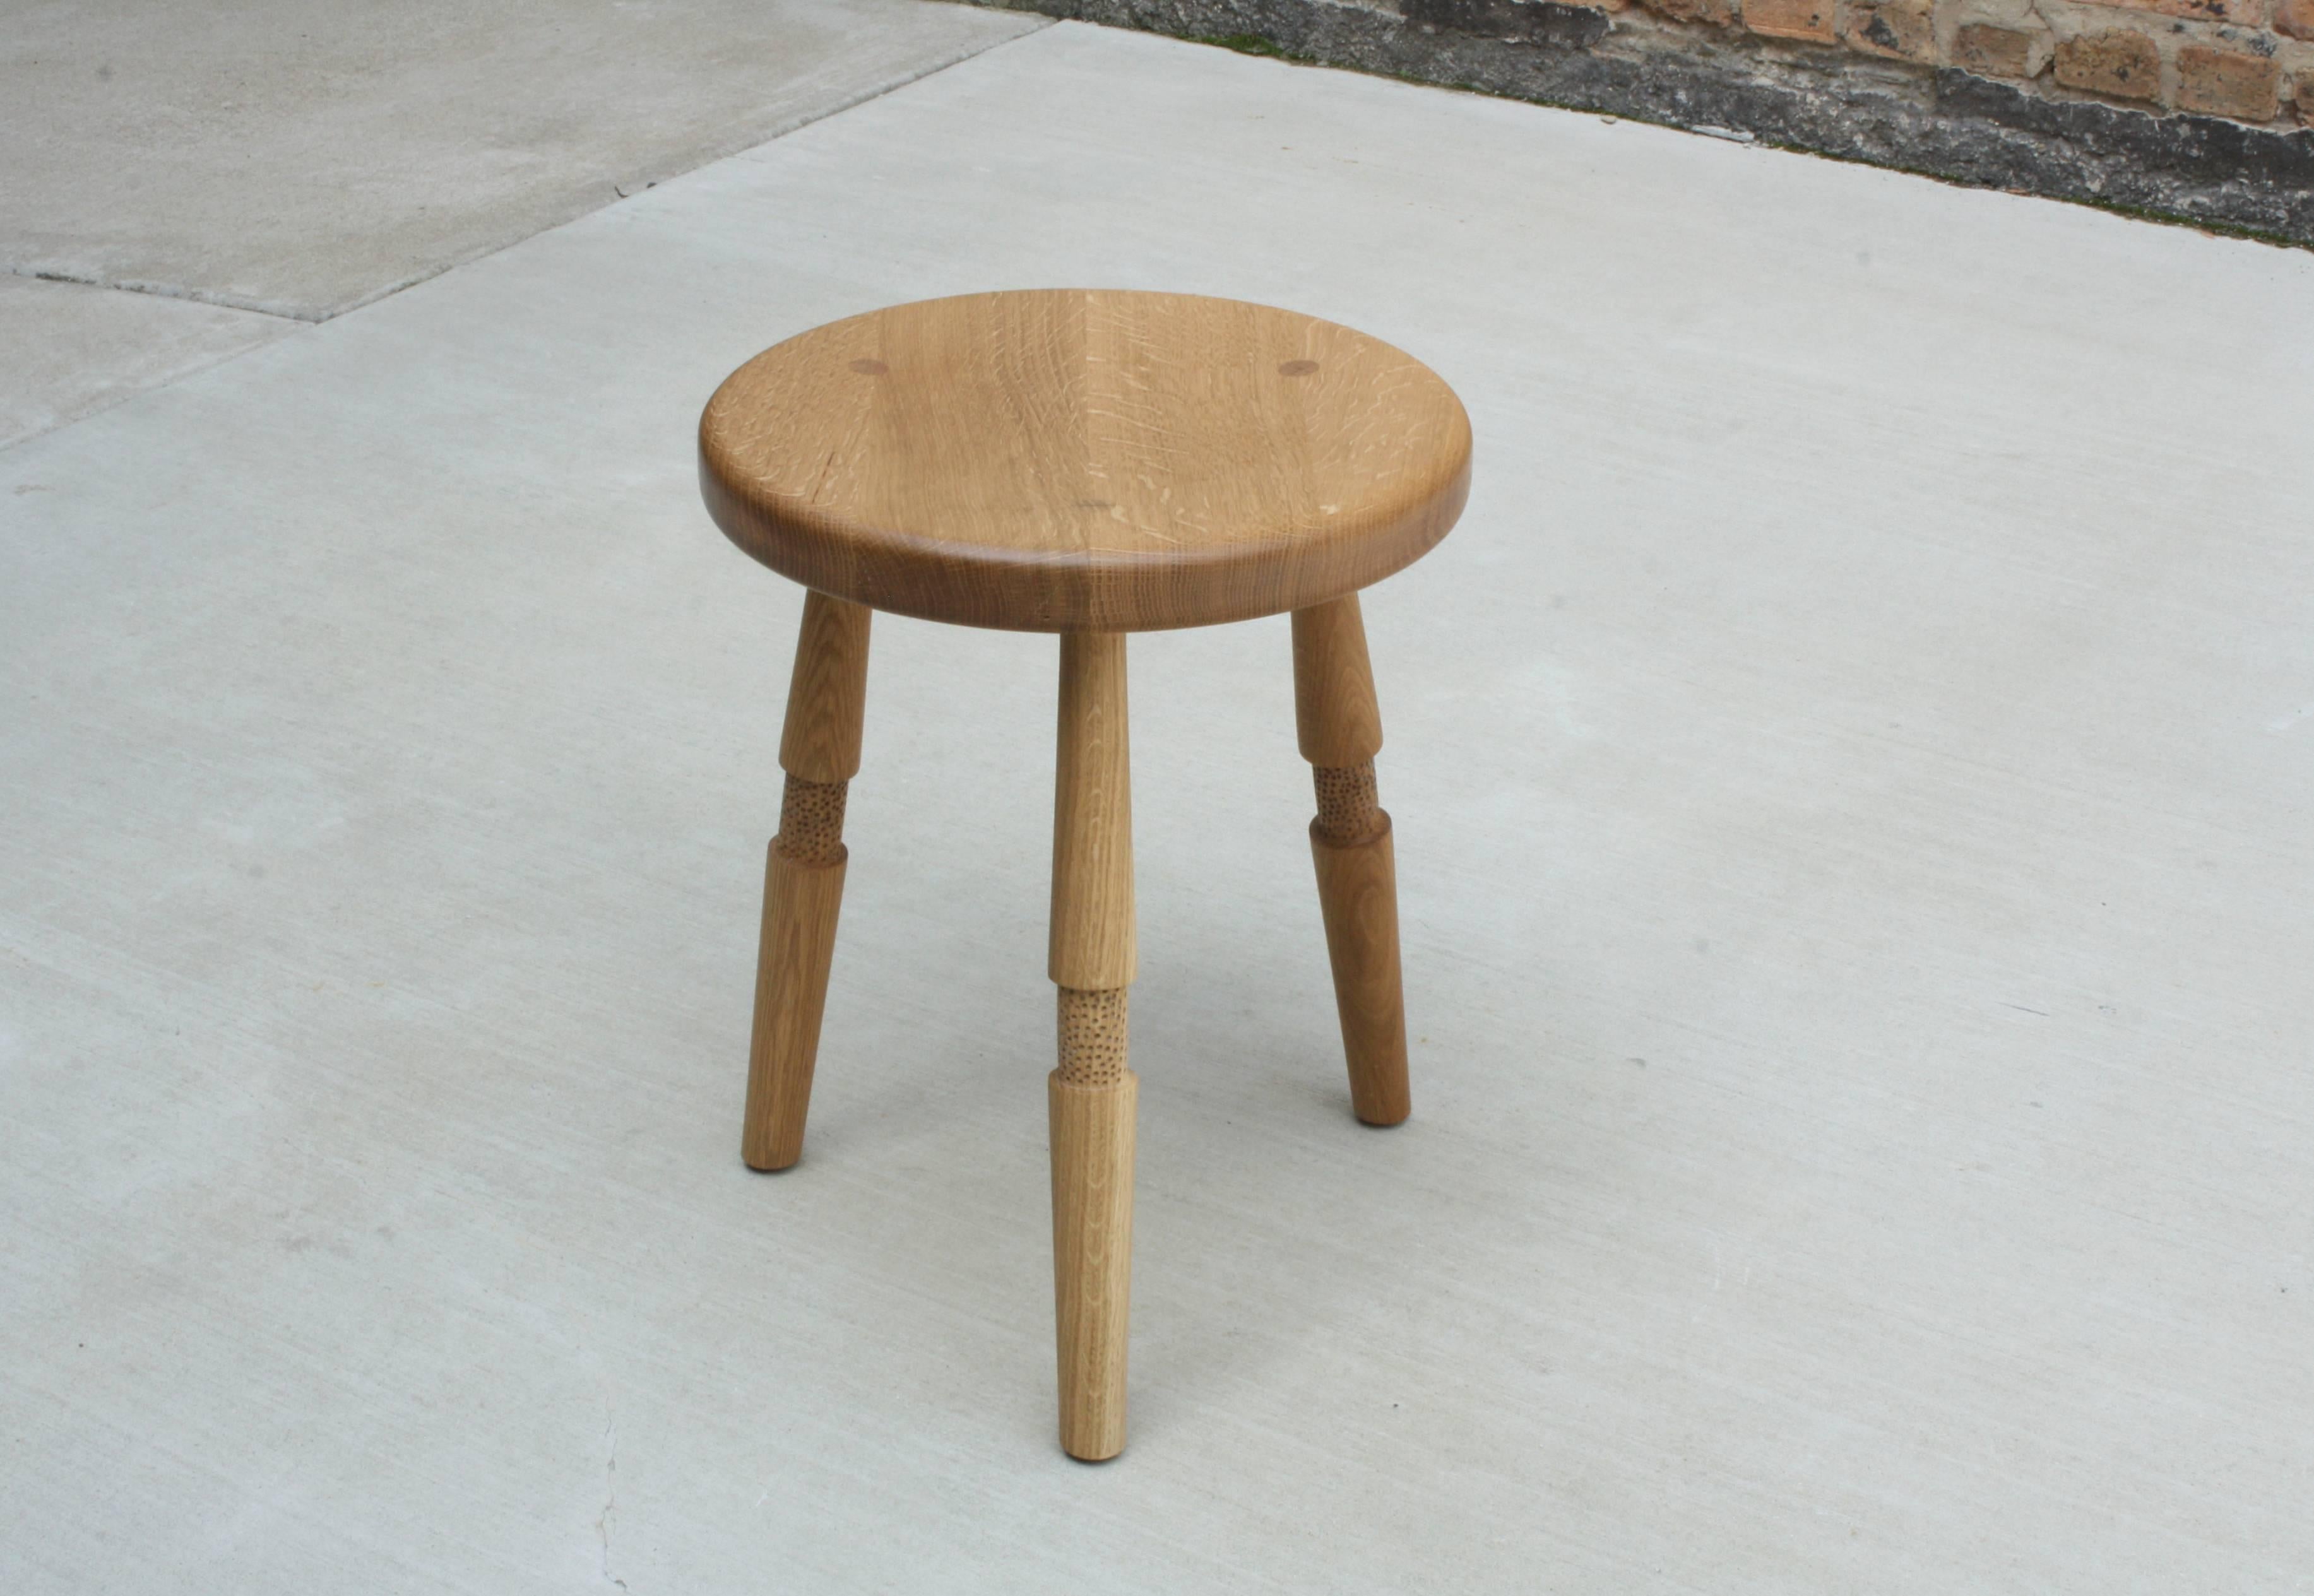 Saddle, Handmade Oxidized Oak Stool with Textured Legs and a Carved Seat For Sale 1